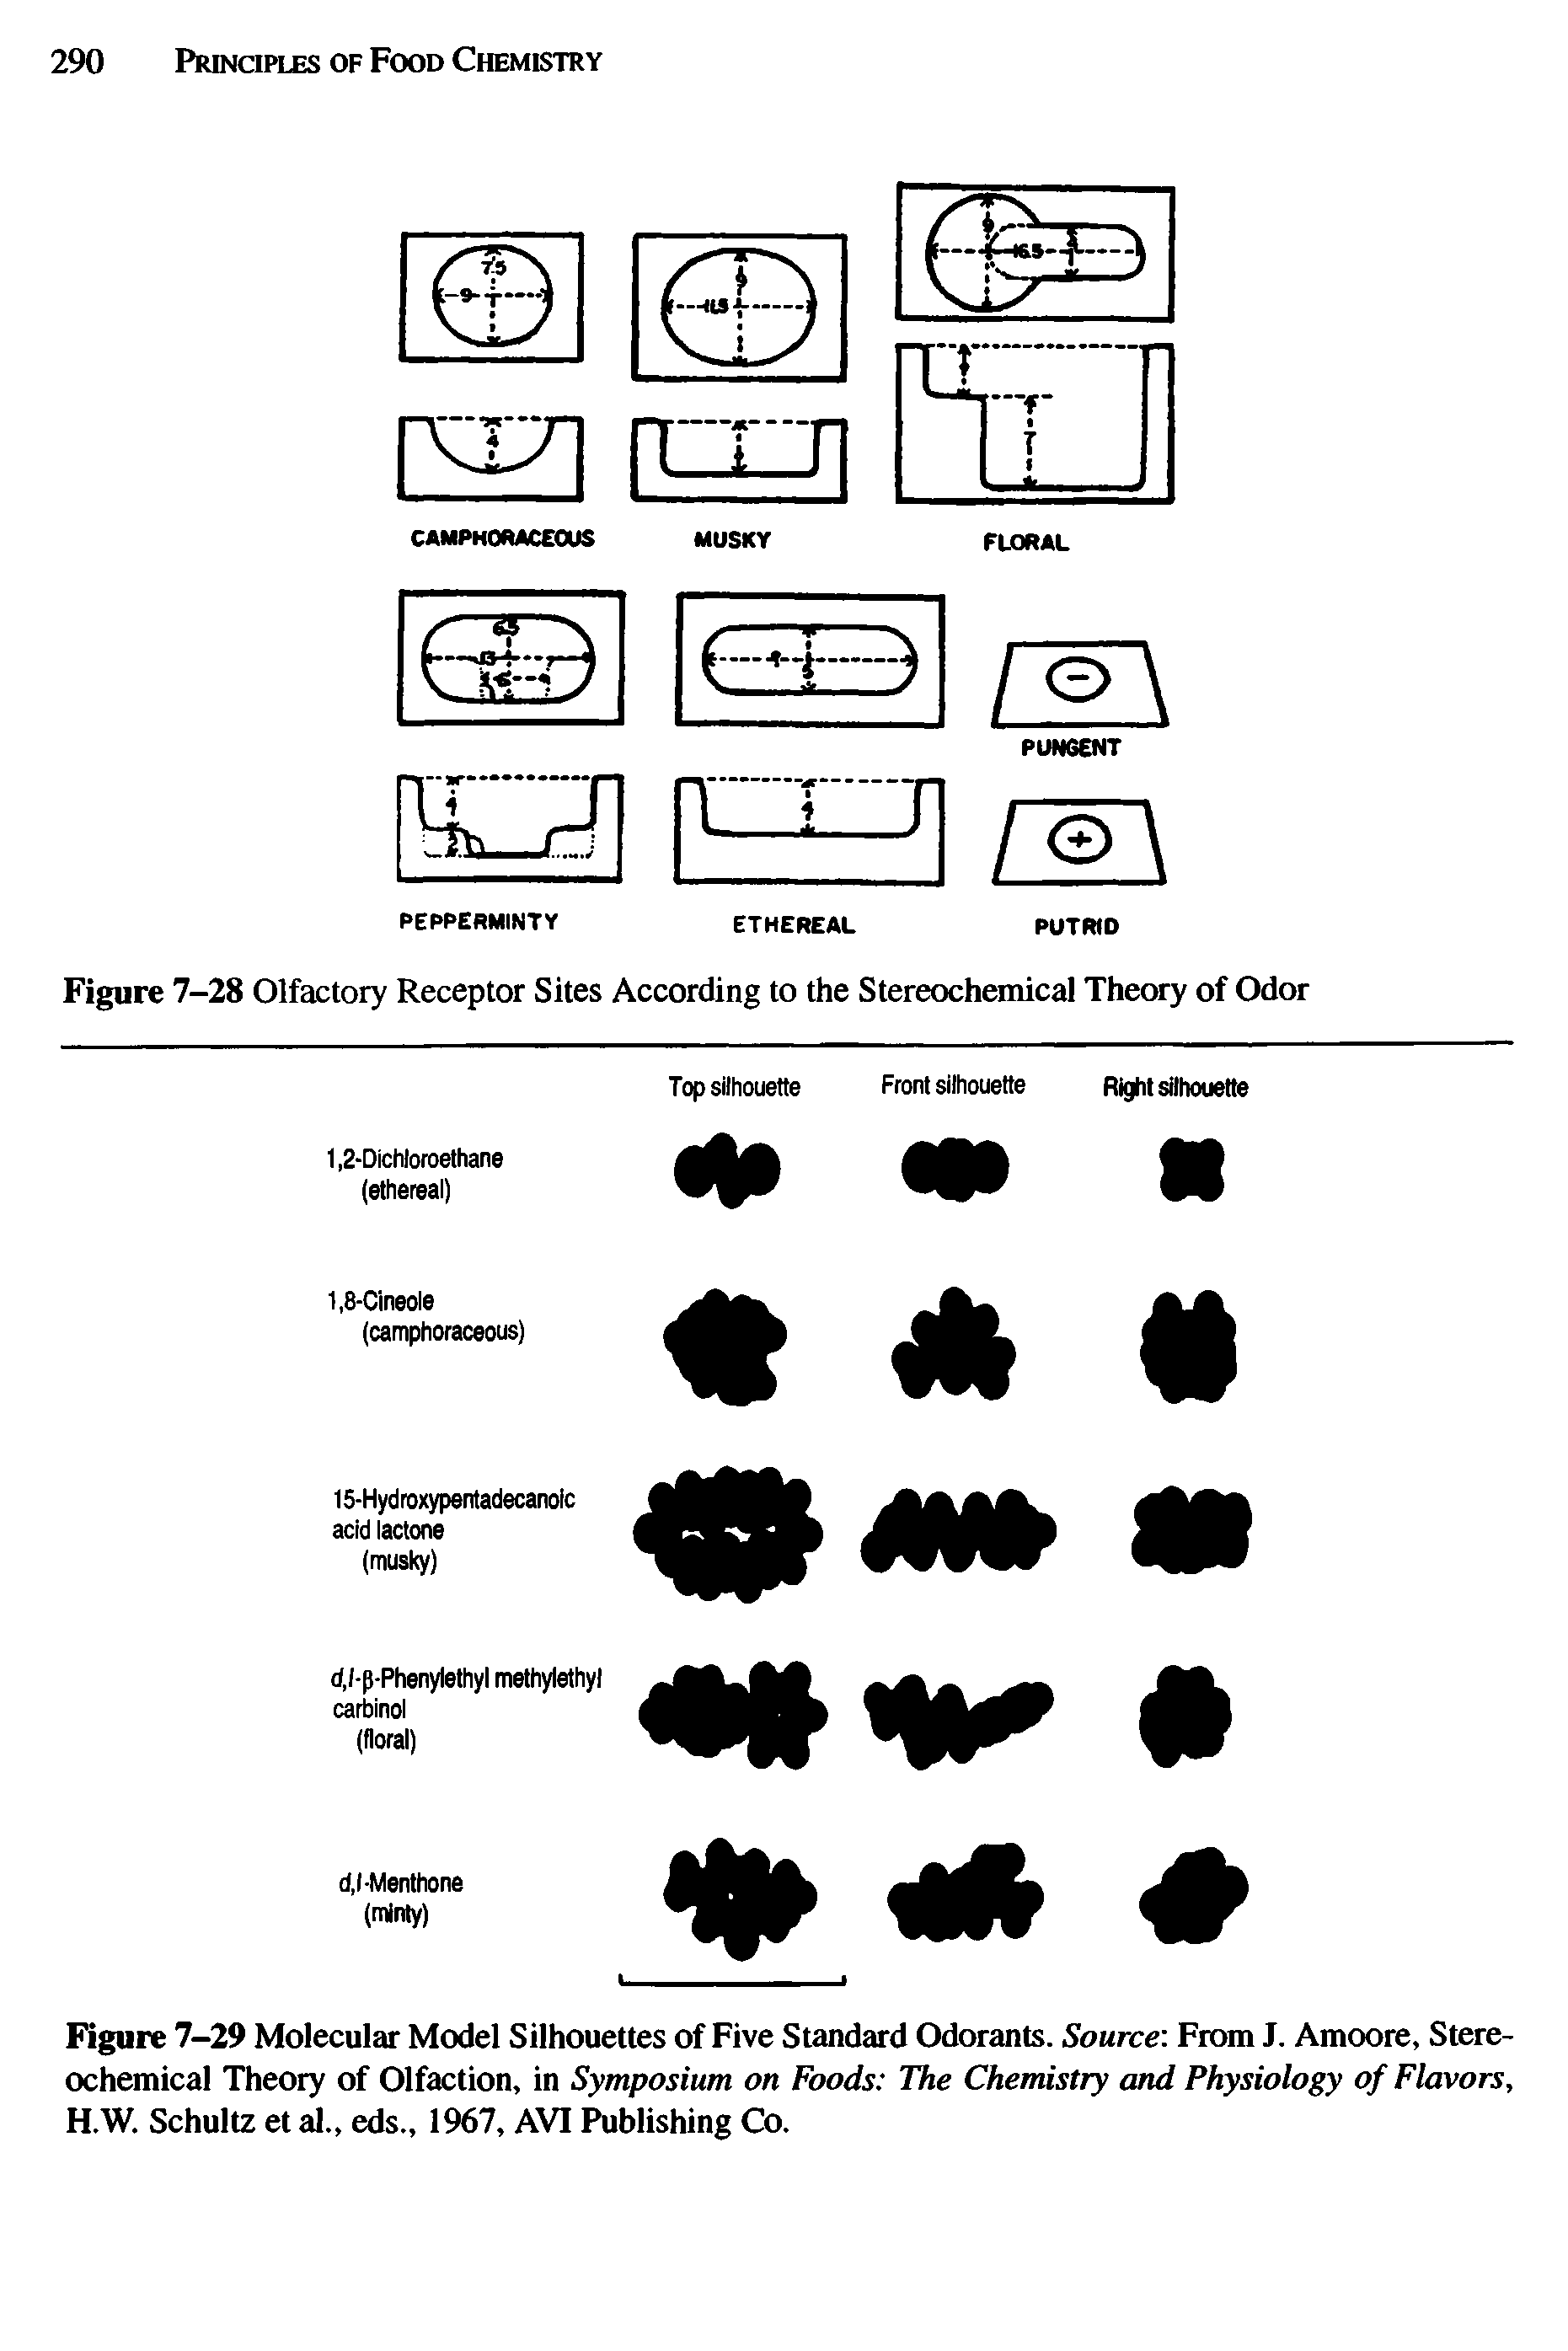 Figure 7-29 Molecular Model Silhouettes of Five Standard Odorants. Source From J. Amoore, Stereochemical Theory of Olfaction, in Symposium on Foods The Chemistry and Physiology of Flavors, H.W. Schultz et al., eds., 1967, AVI Publishing Co.